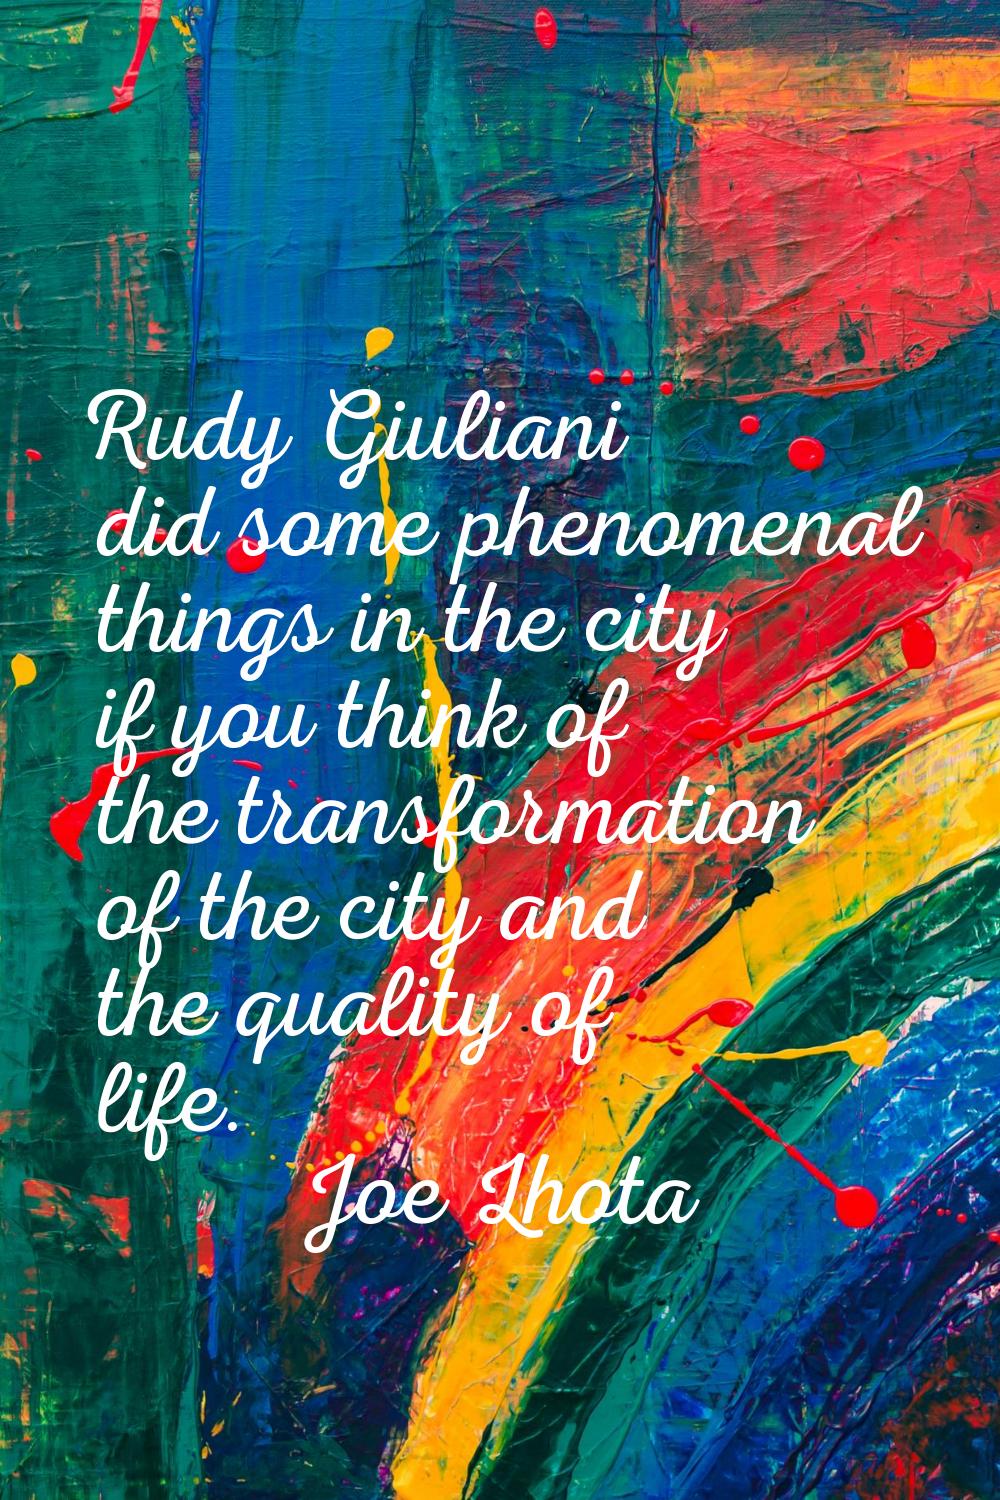 Rudy Giuliani did some phenomenal things in the city if you think of the transformation of the city